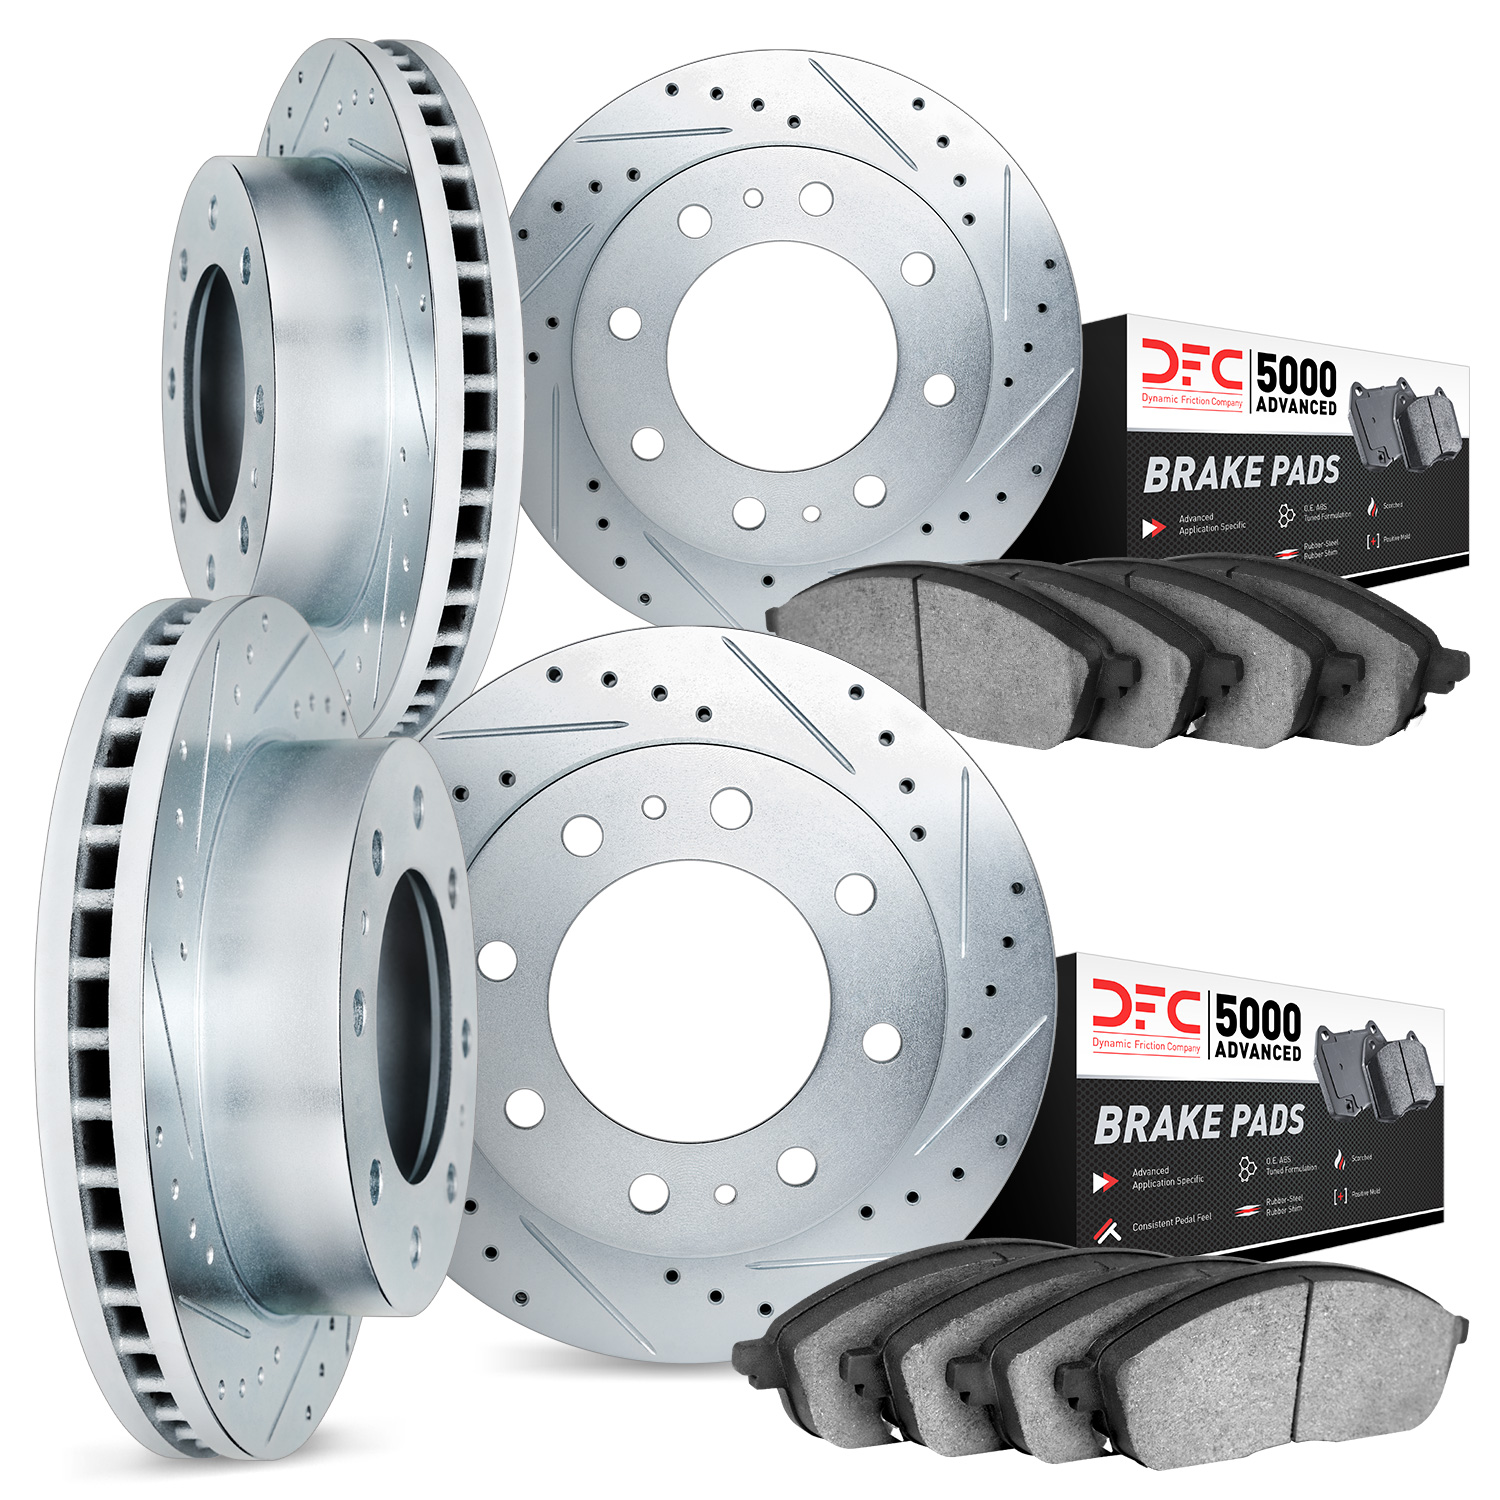 7504-54312 Drilled/Slotted Brake Rotors w/5000 Advanced Brake Pads Kit [Silver], 2000-2004 Ford/Lincoln/Mercury/Mazda, Position: